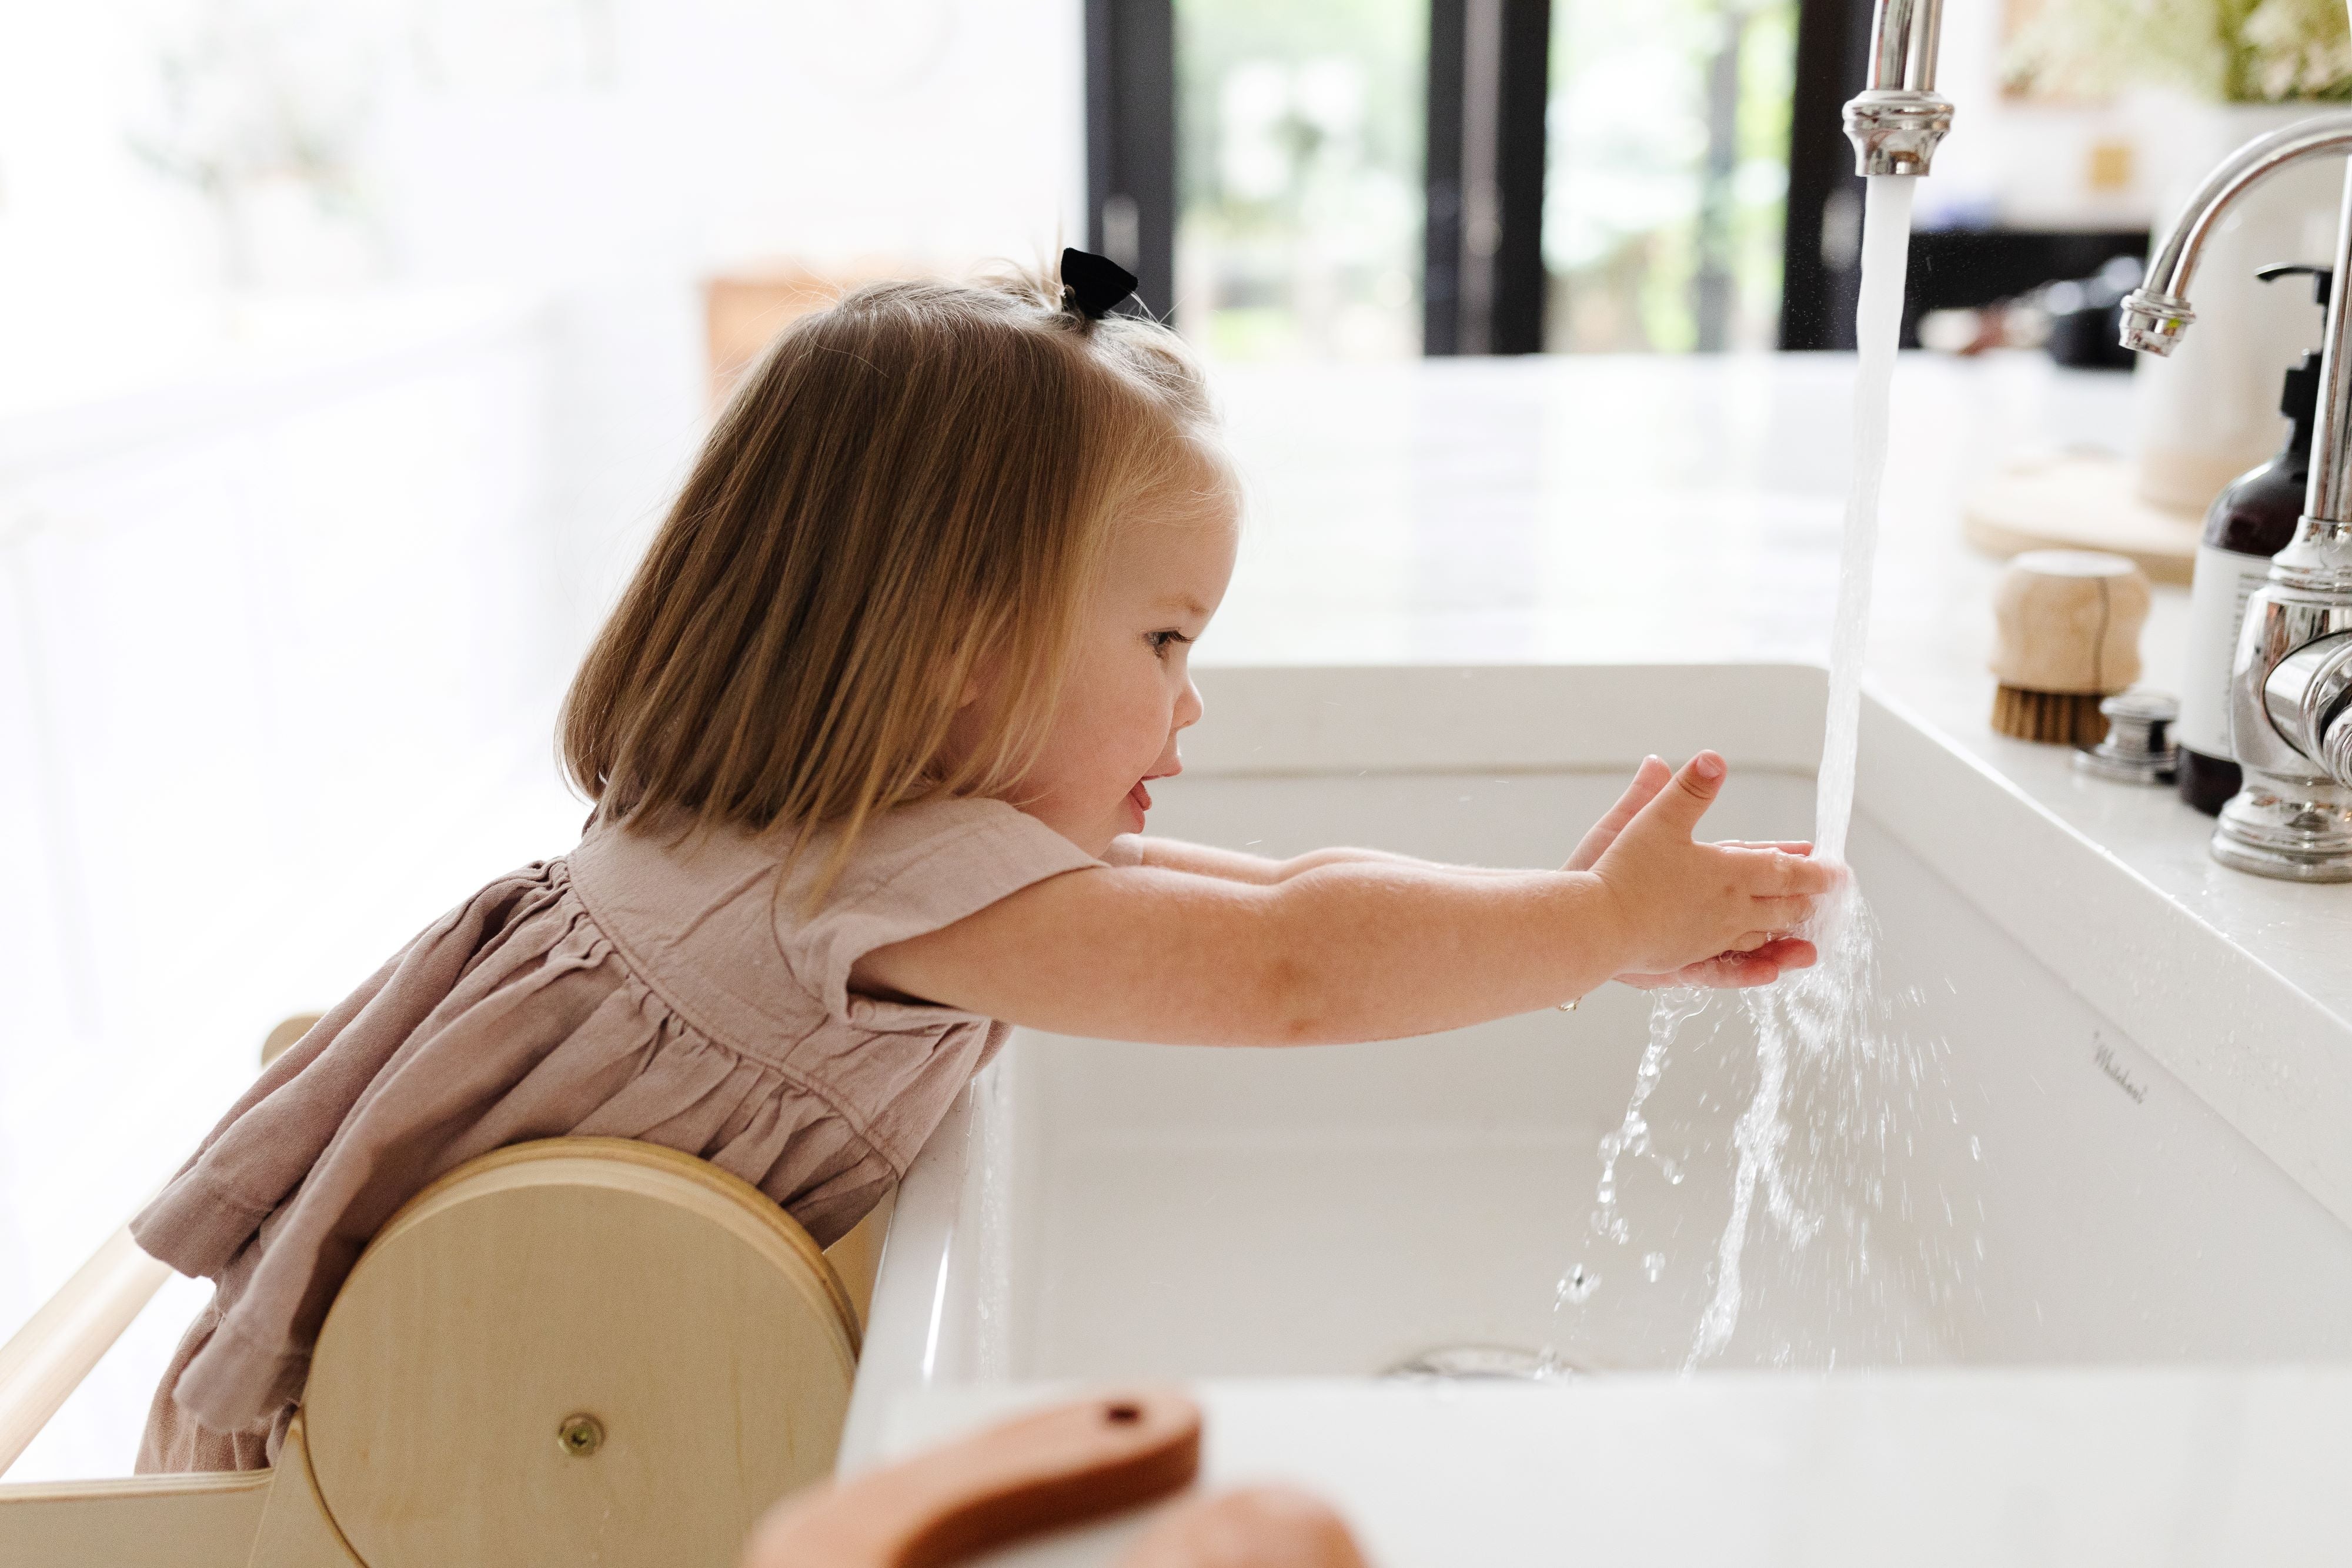 15 Easy Kitchen Sink Sensory Activities for Toddlers